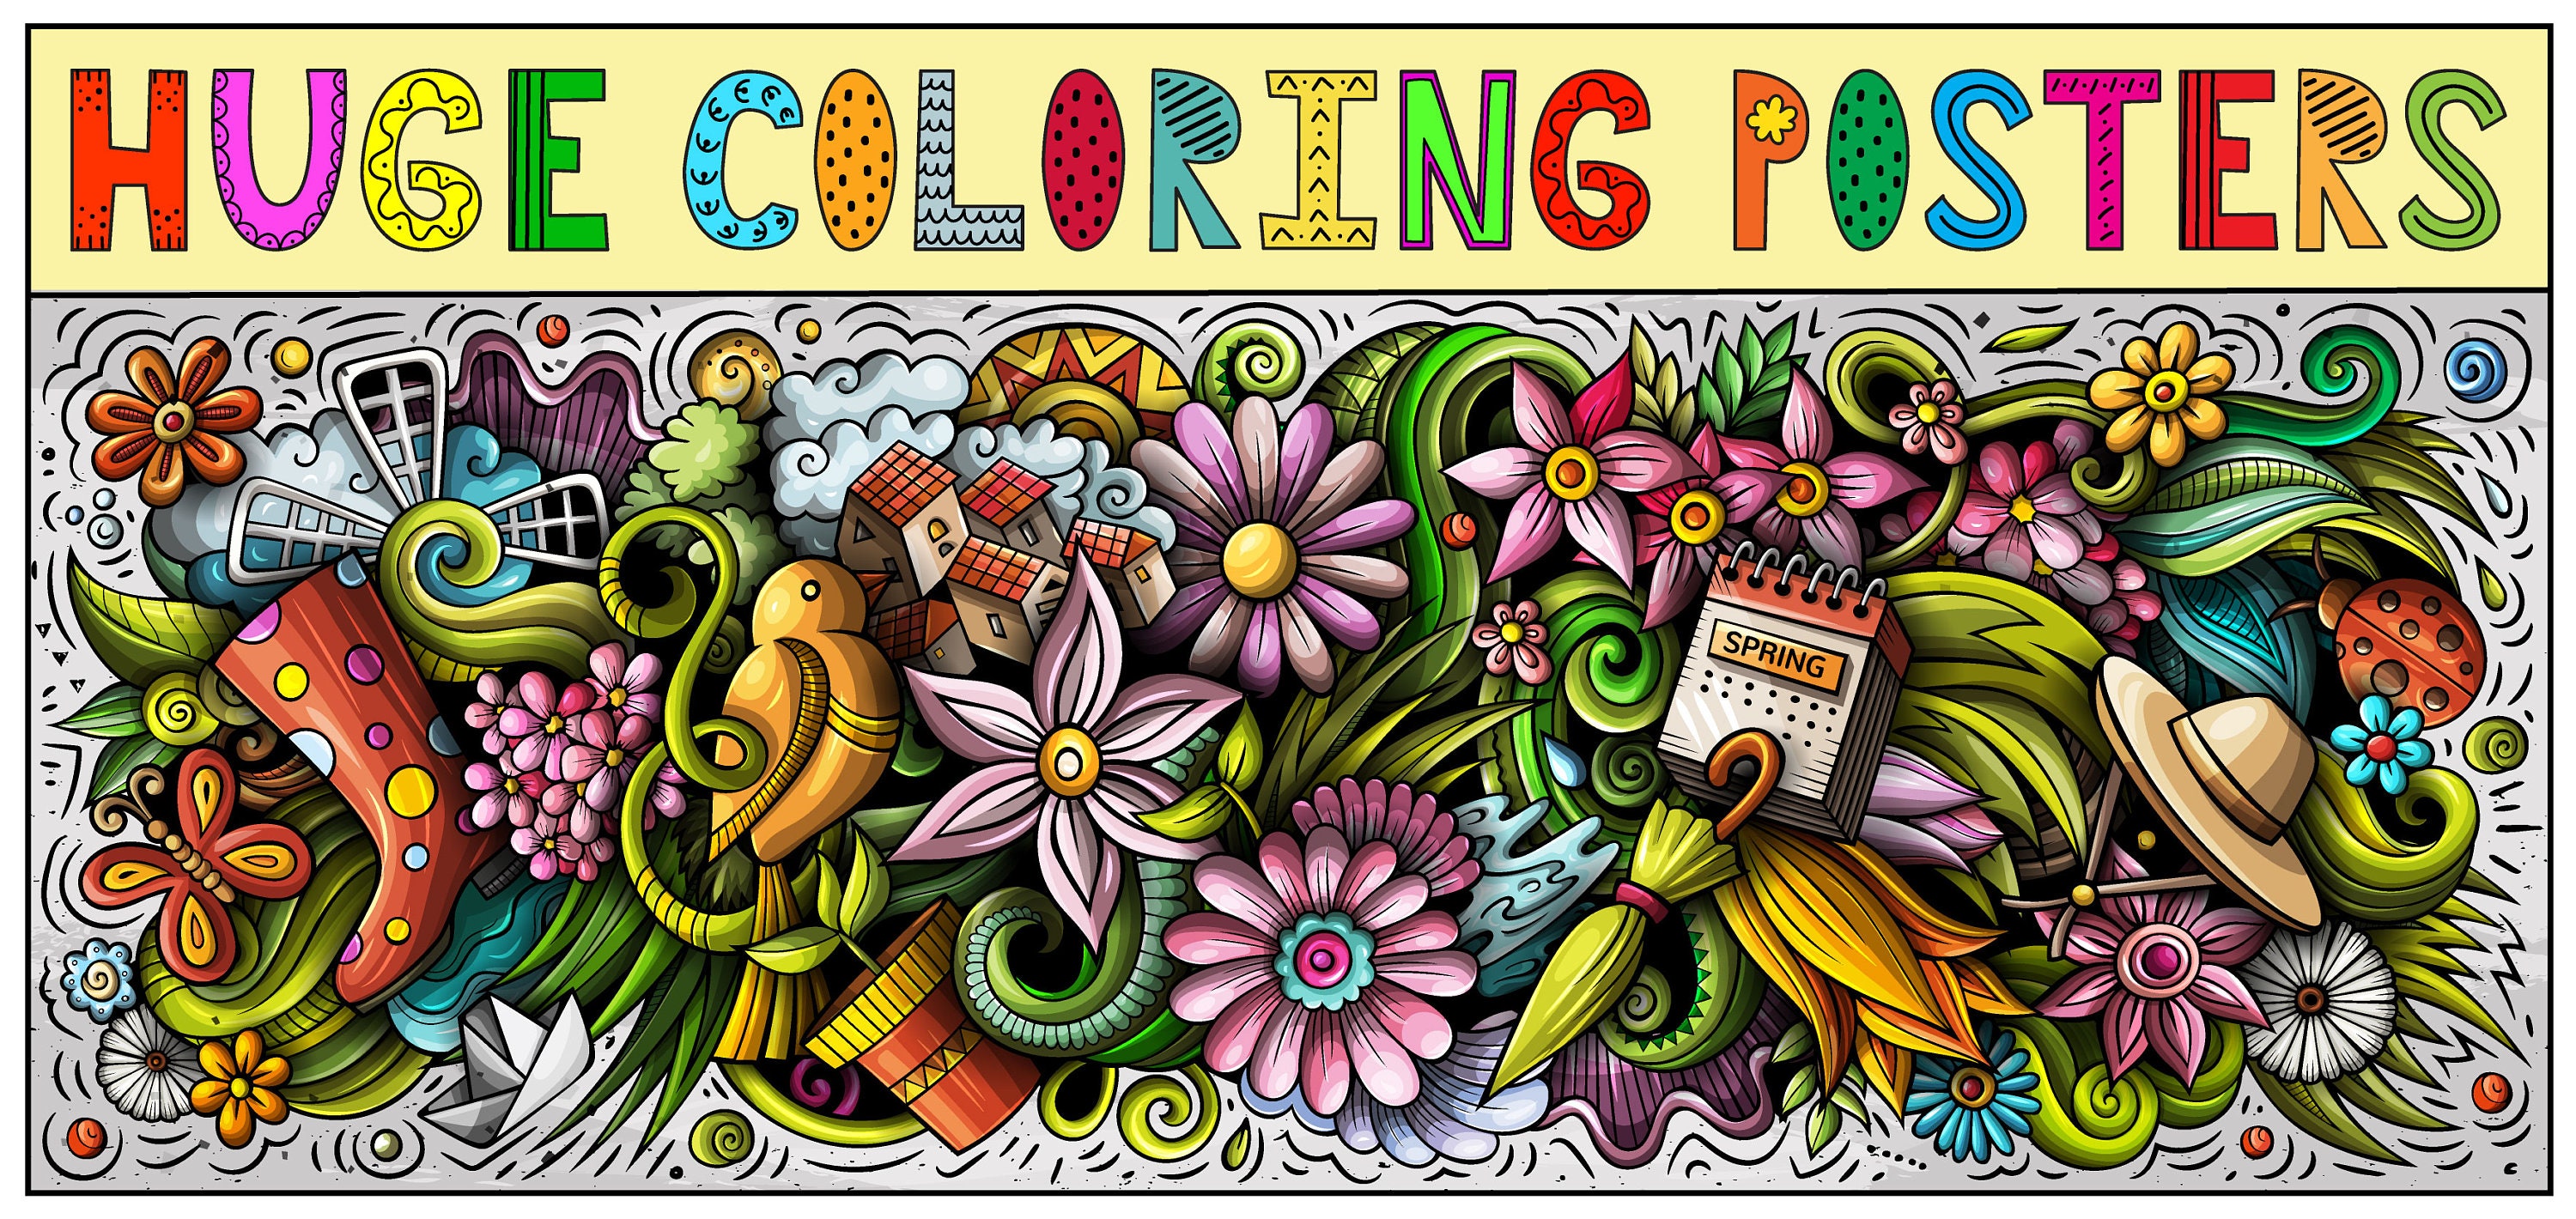 Giant Coloring Poster for Adults and Kids - Wall Coloring Poster  Motivational - Large Coloring Posters for Classroom - Huge Coloring Poster  at Work